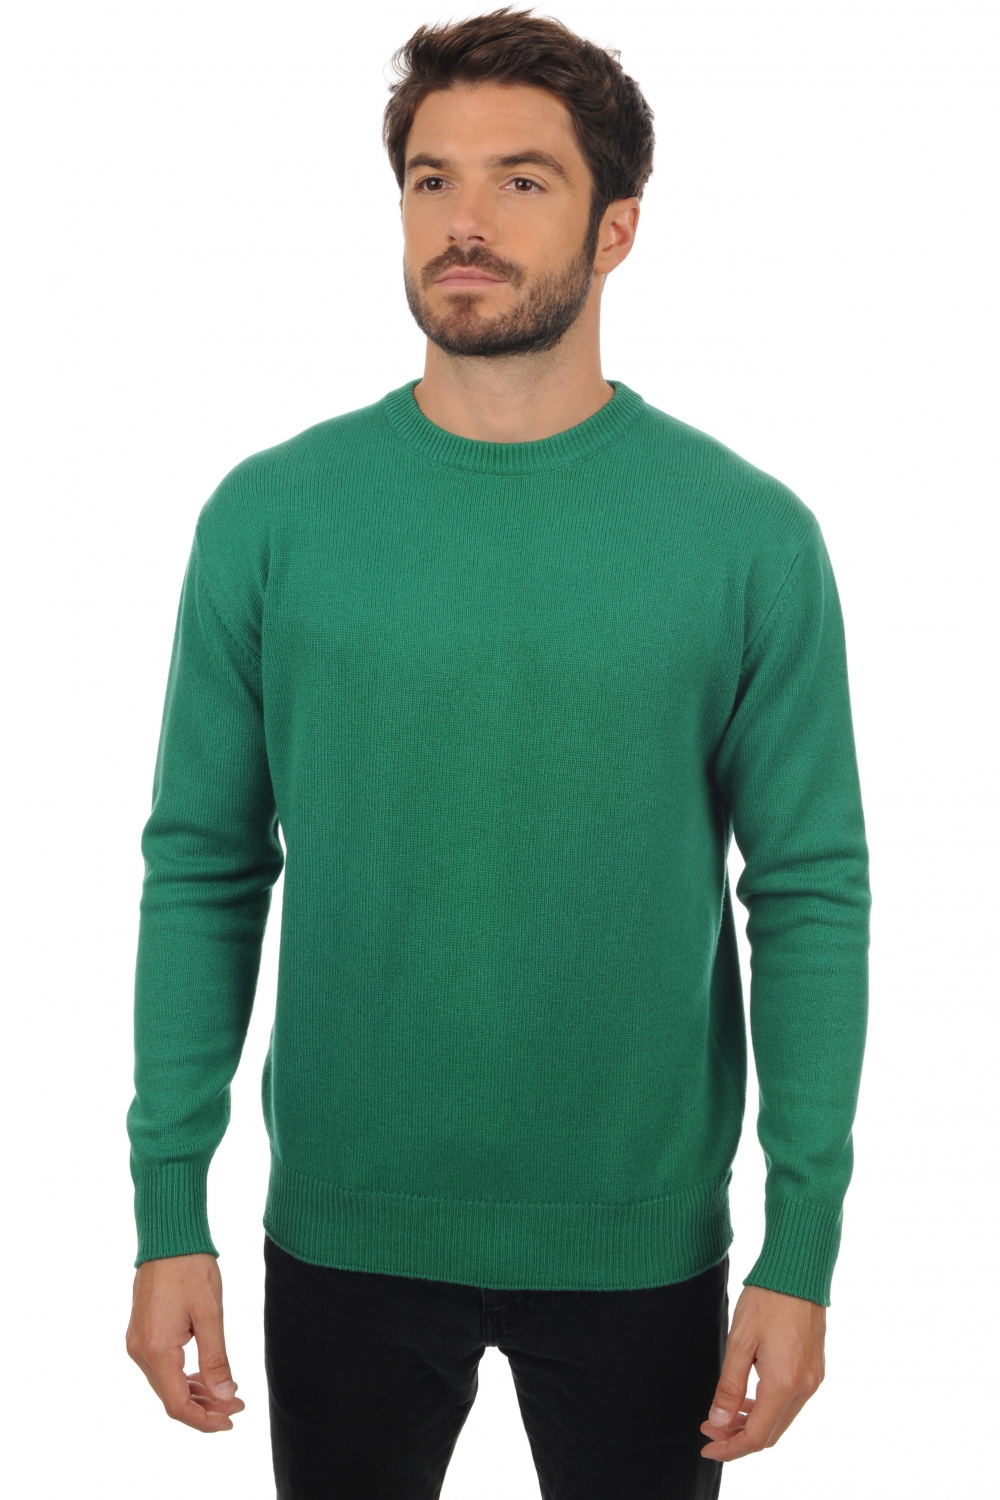 Cachemire pull homme col rond nestor 4f vert anglais 3xl